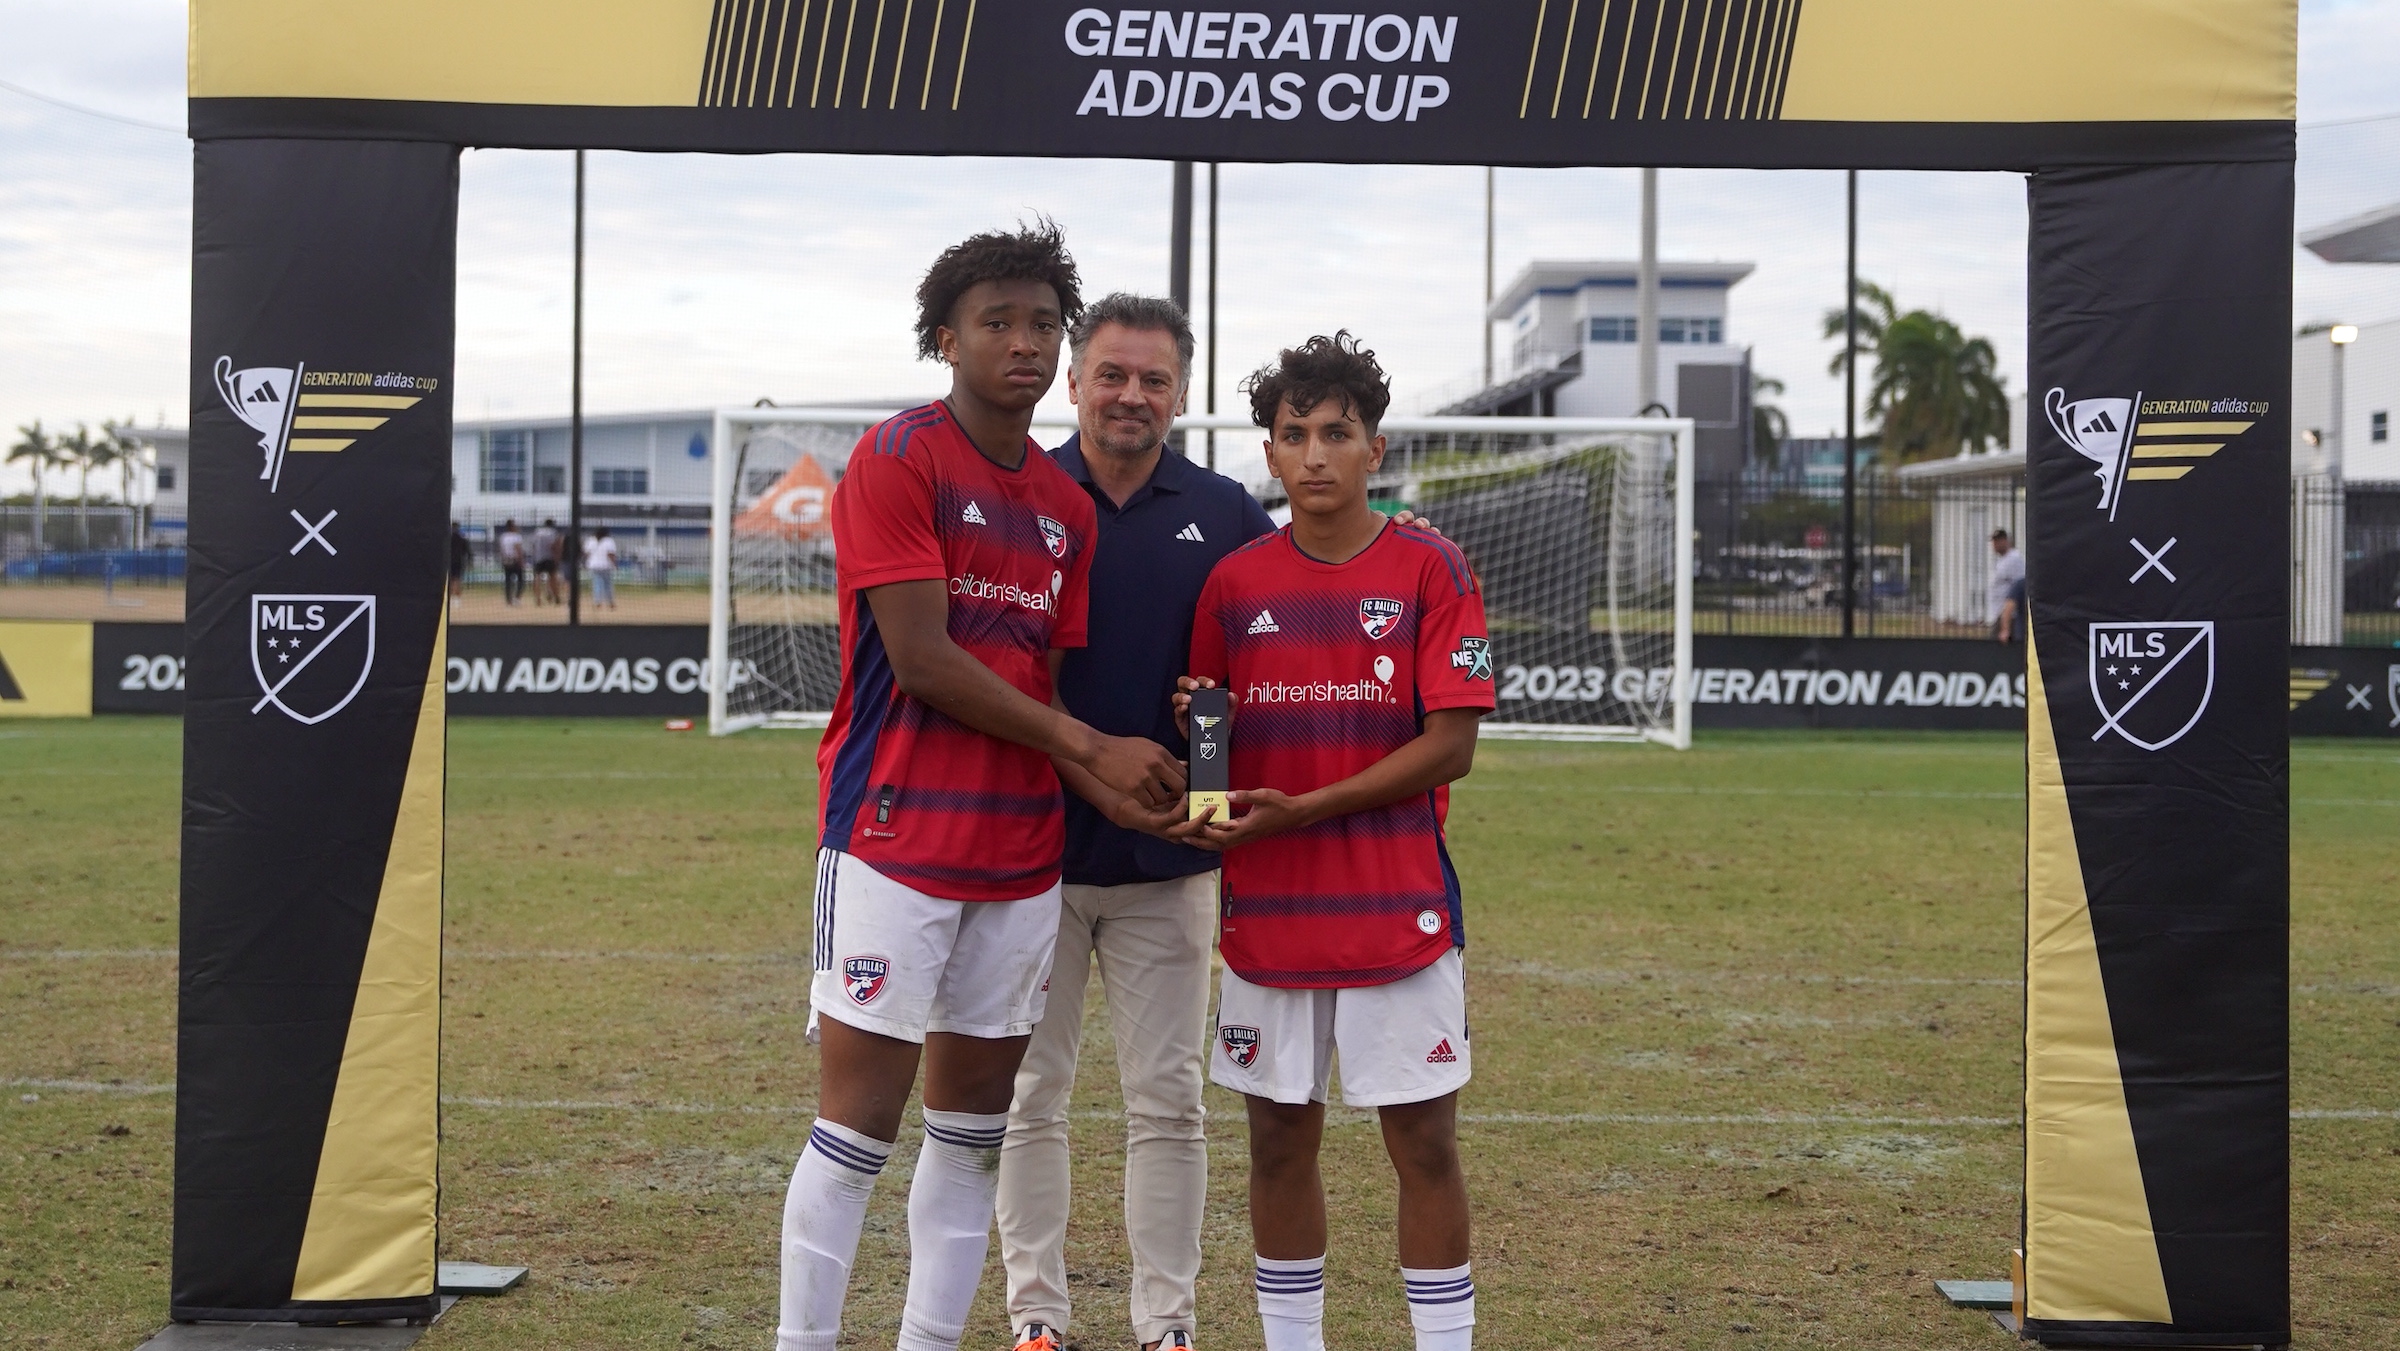 reactie Kunstmatig paars Individual award winners announced from 2023 Generation adidas Cup -  SoccerWire